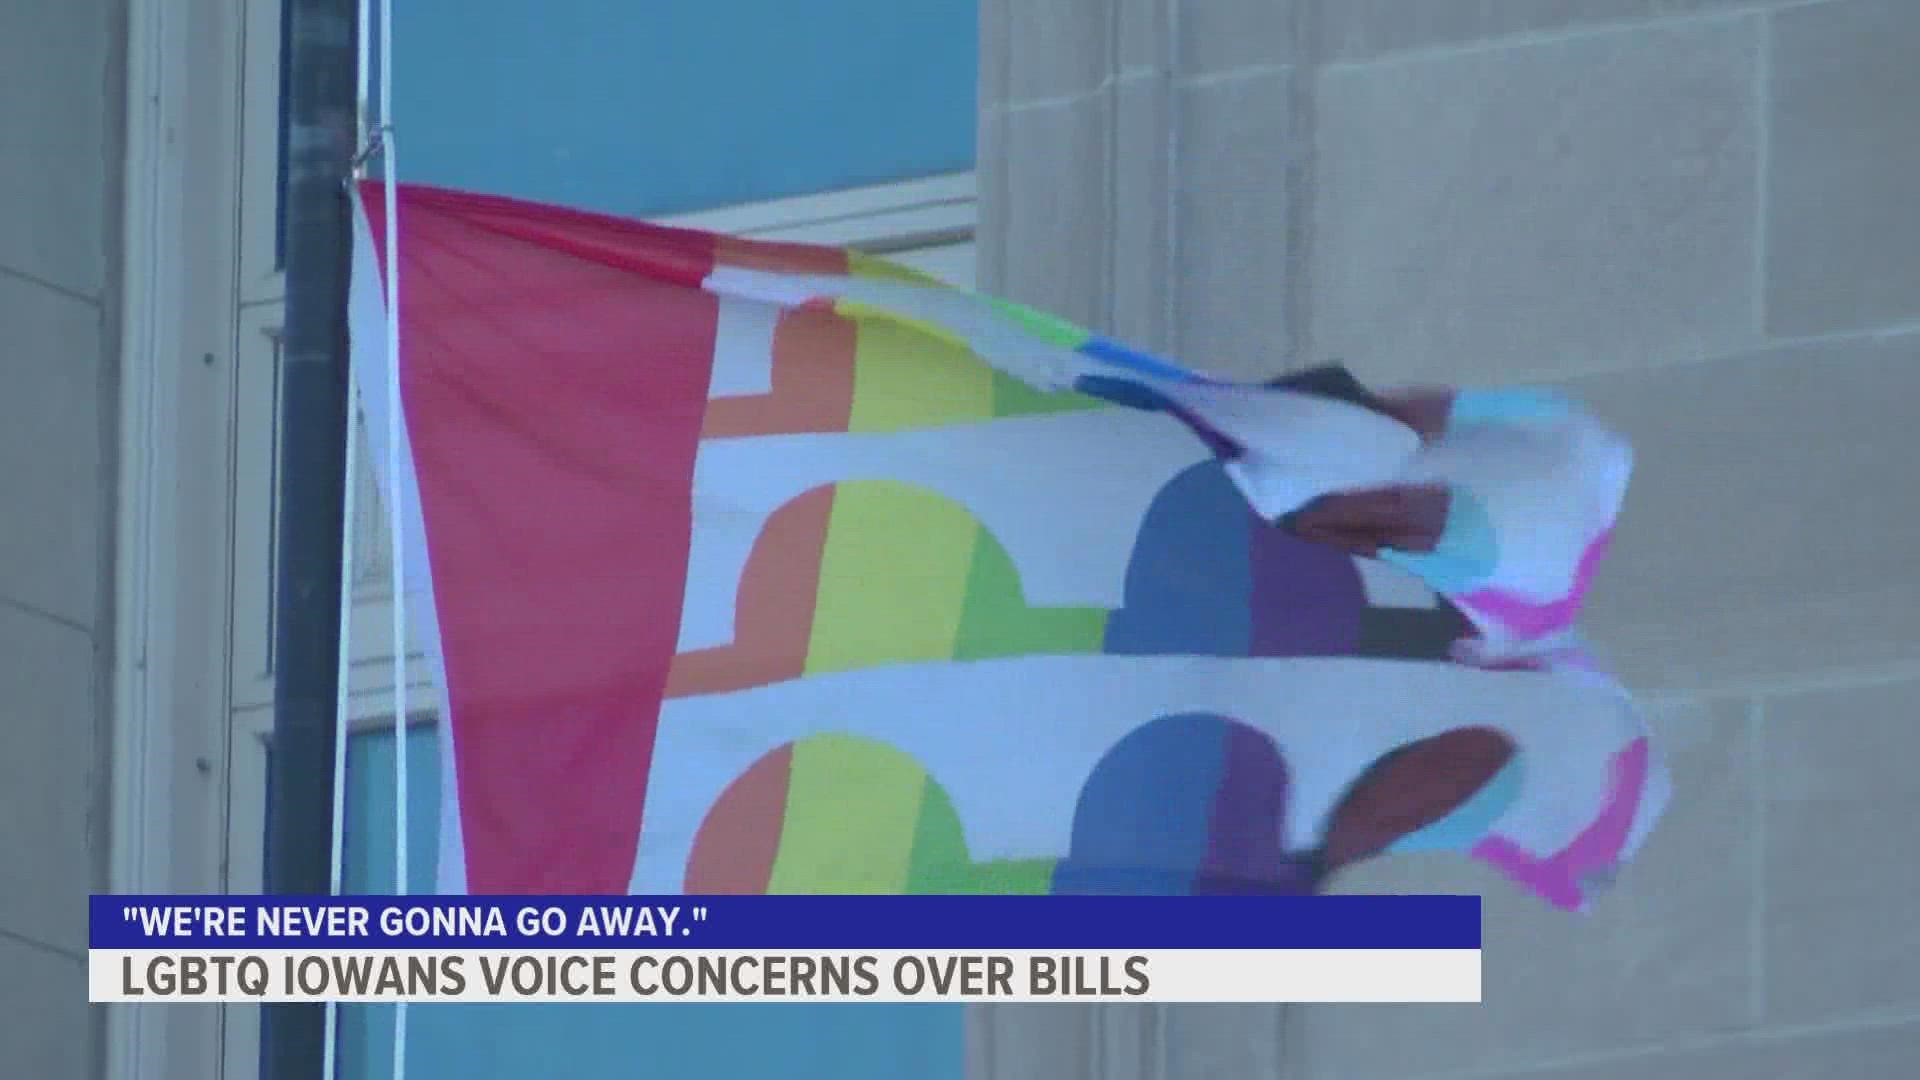 While supporters believe House File 8 and House File 9 give more power to parents, those against say they're concerned the bills will cause young people harm.